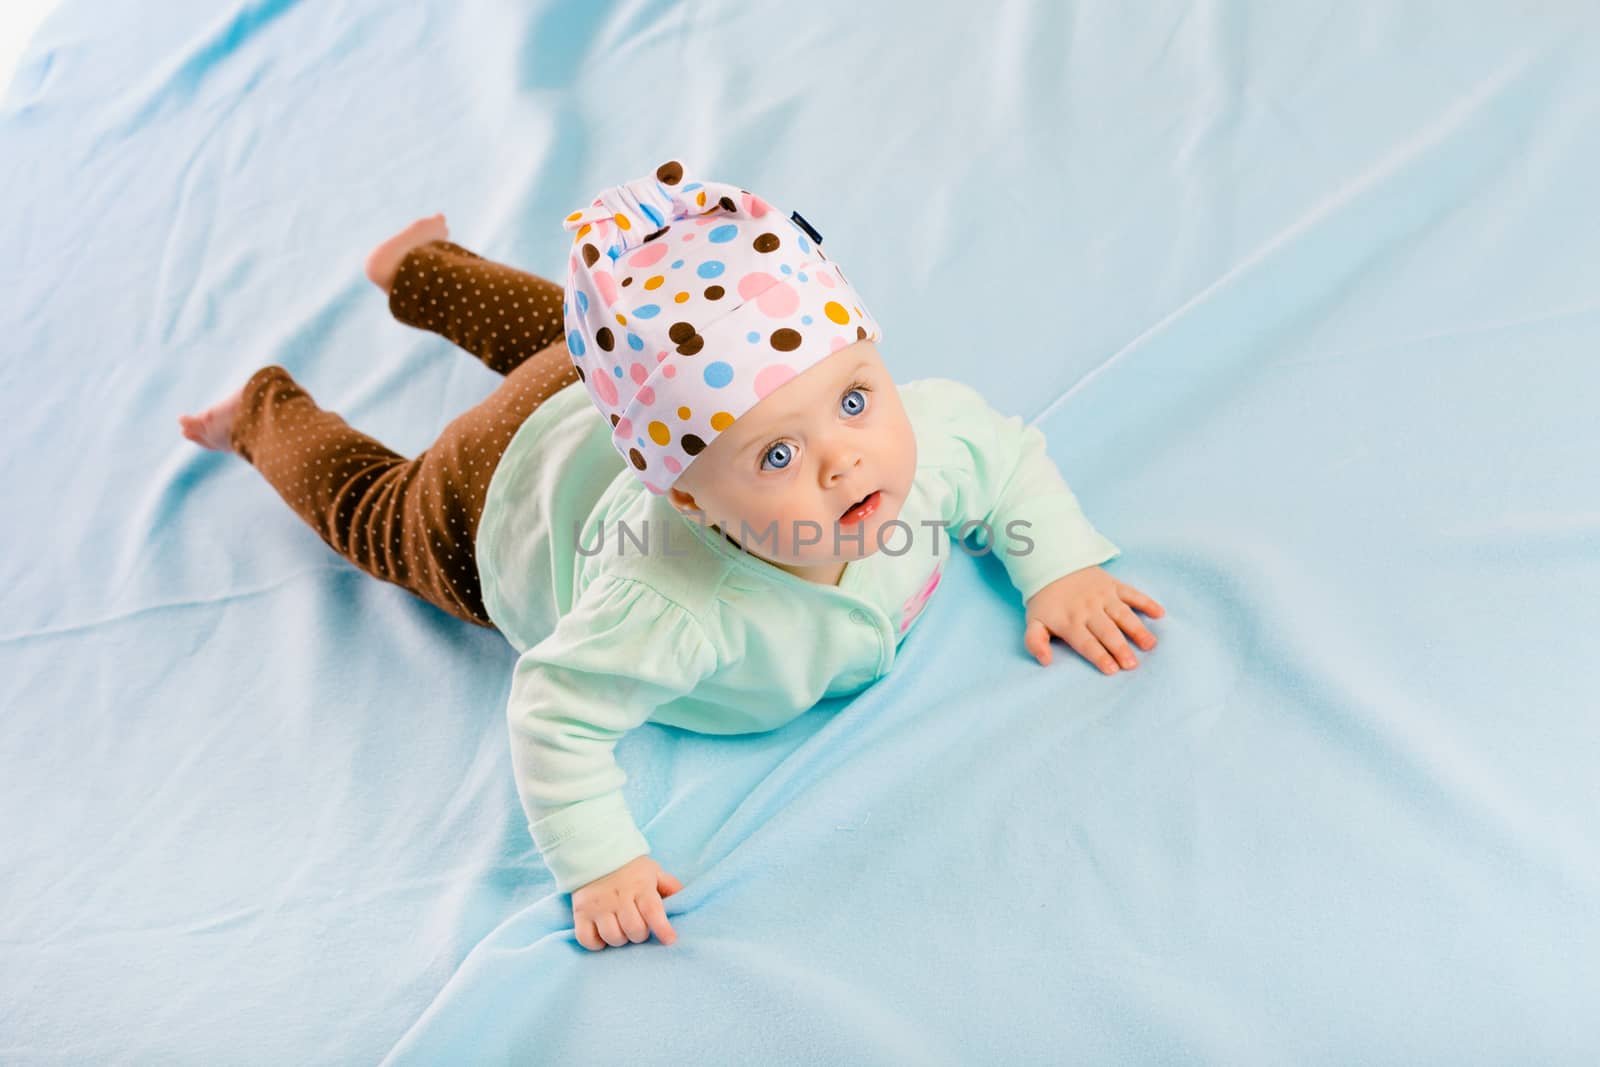 The blue-eyed baby in hat crawling on the blue plaid